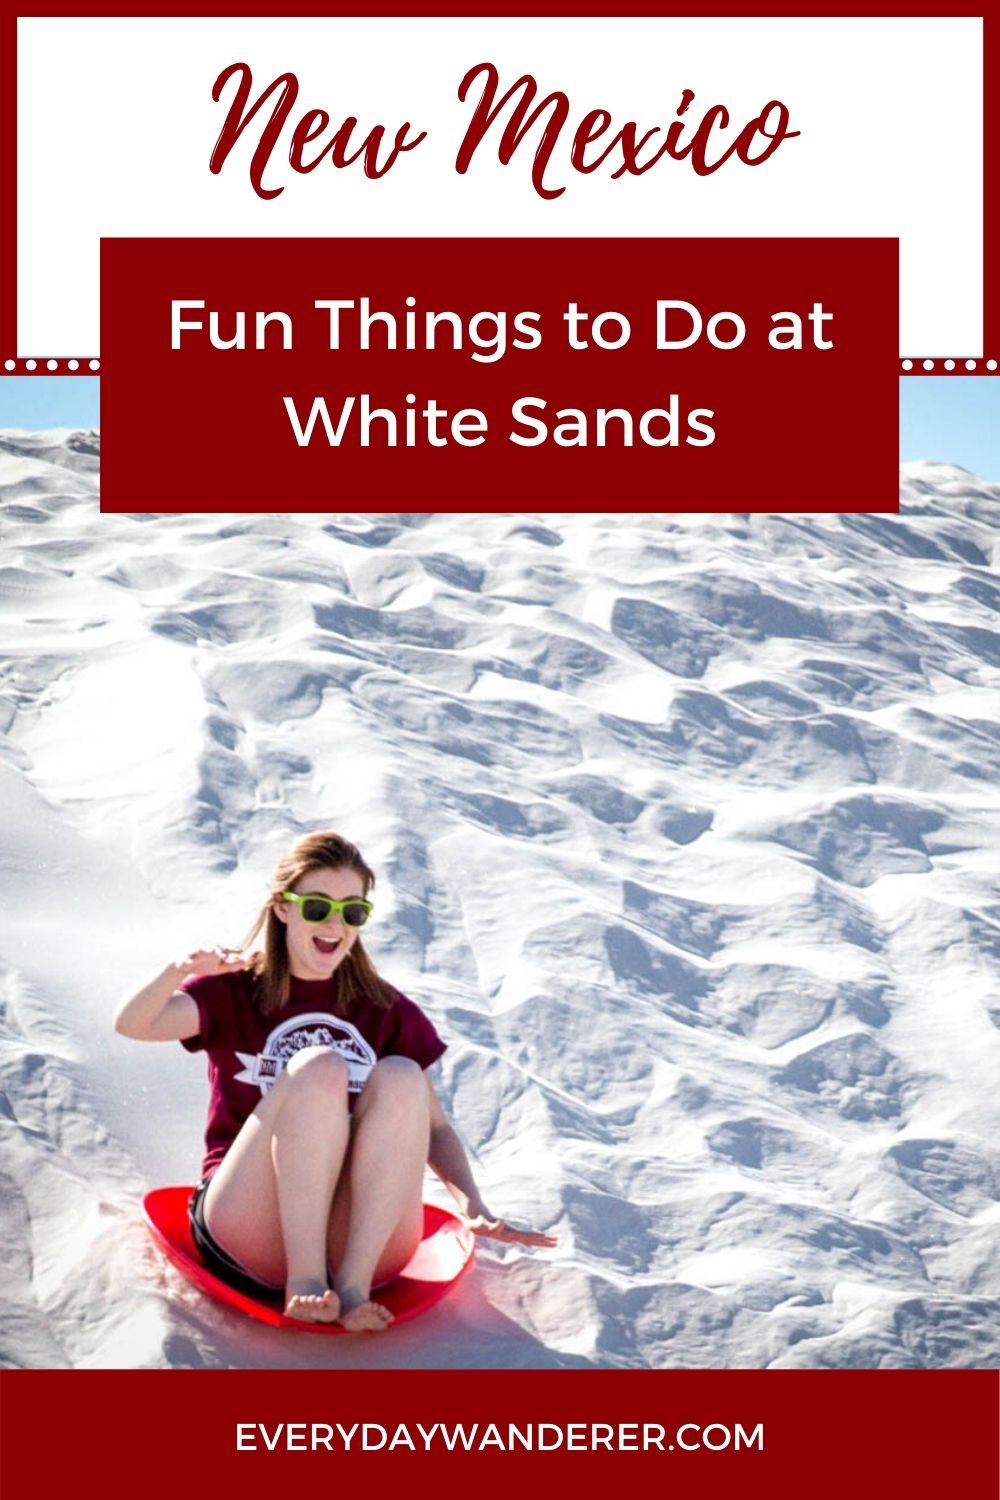 10 Things to Do at White Sands - Pin 4 - JPG